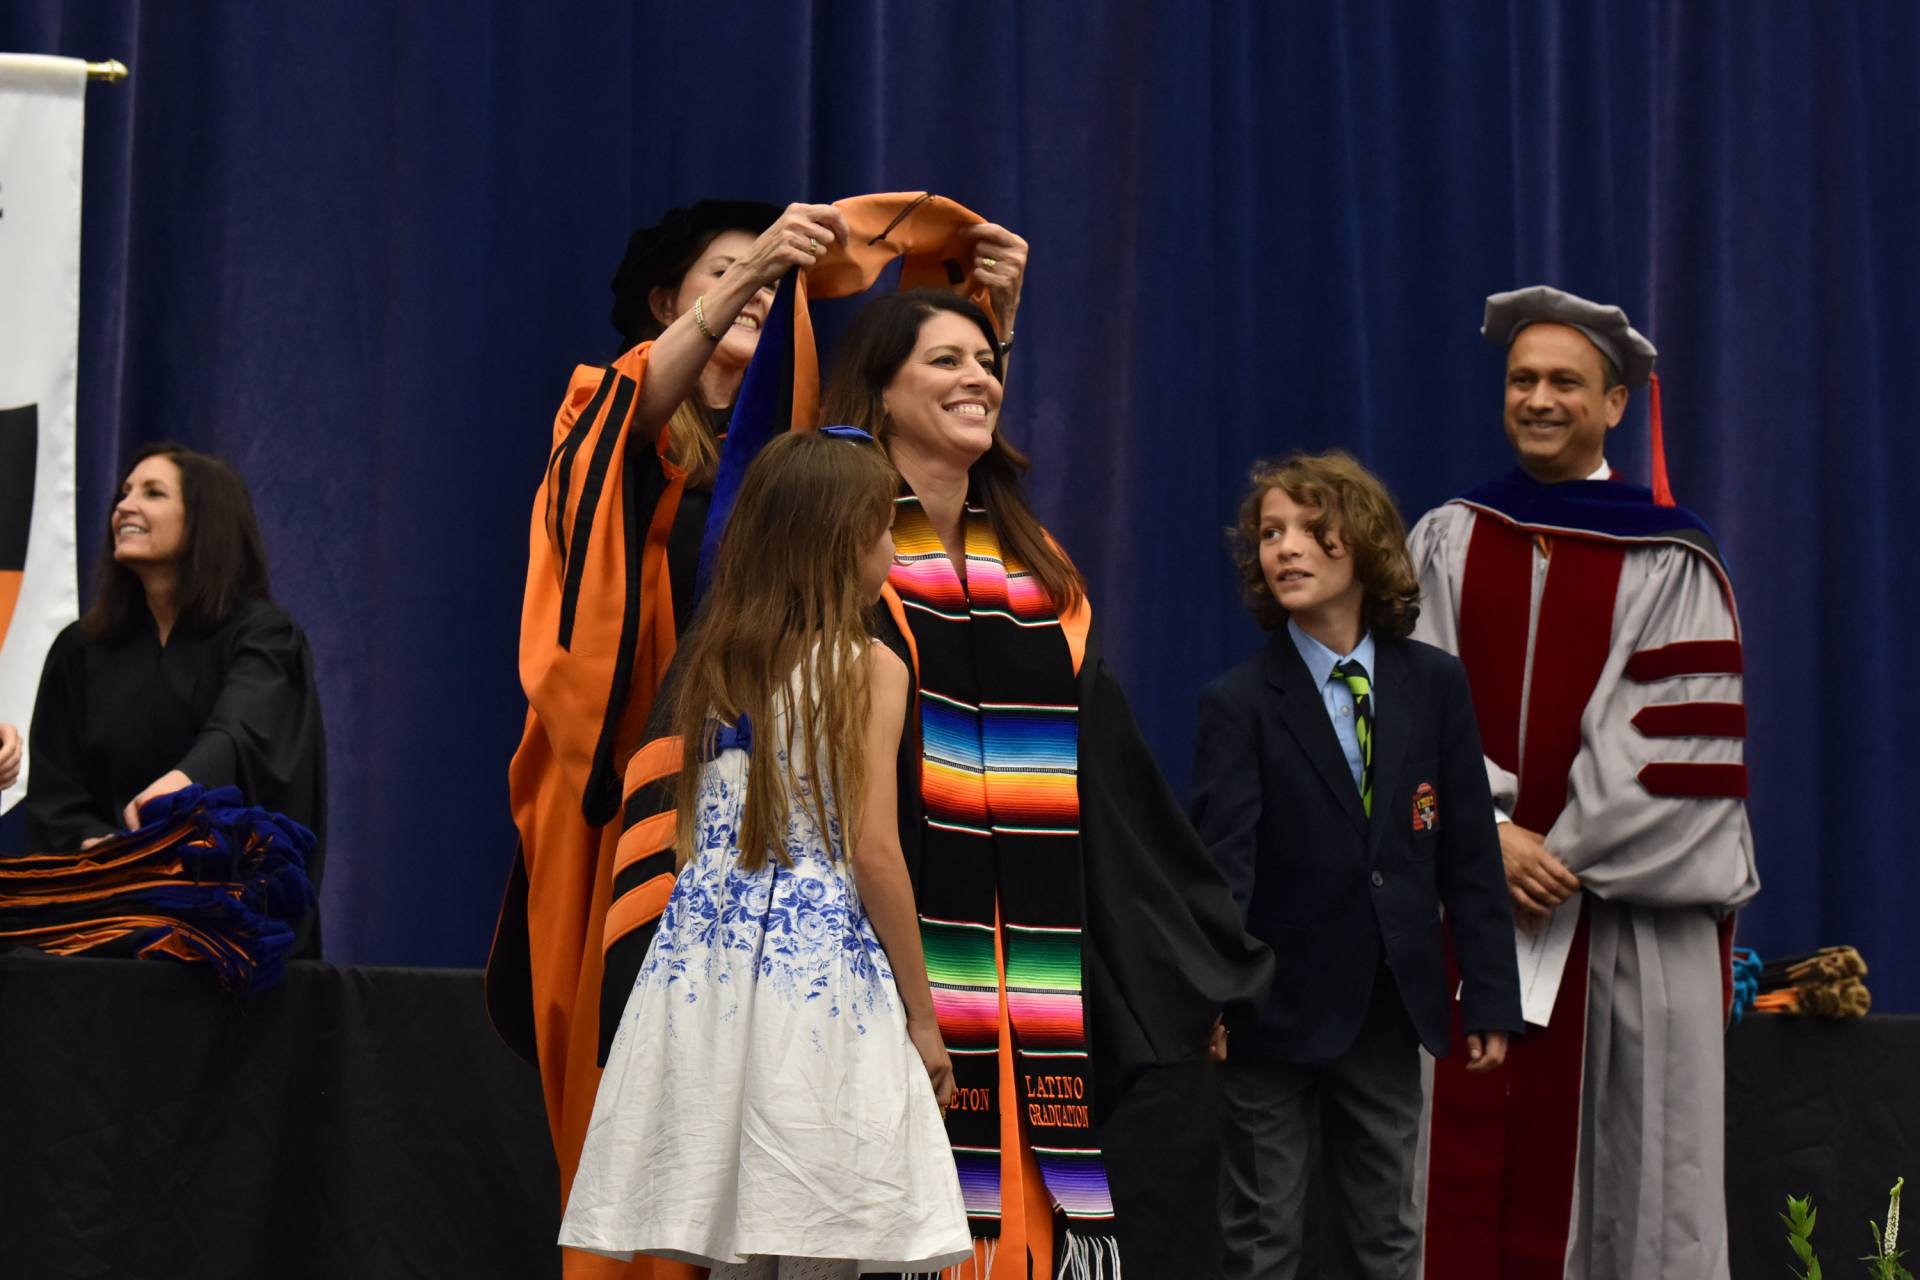 Student stands with son and daughter during hooding